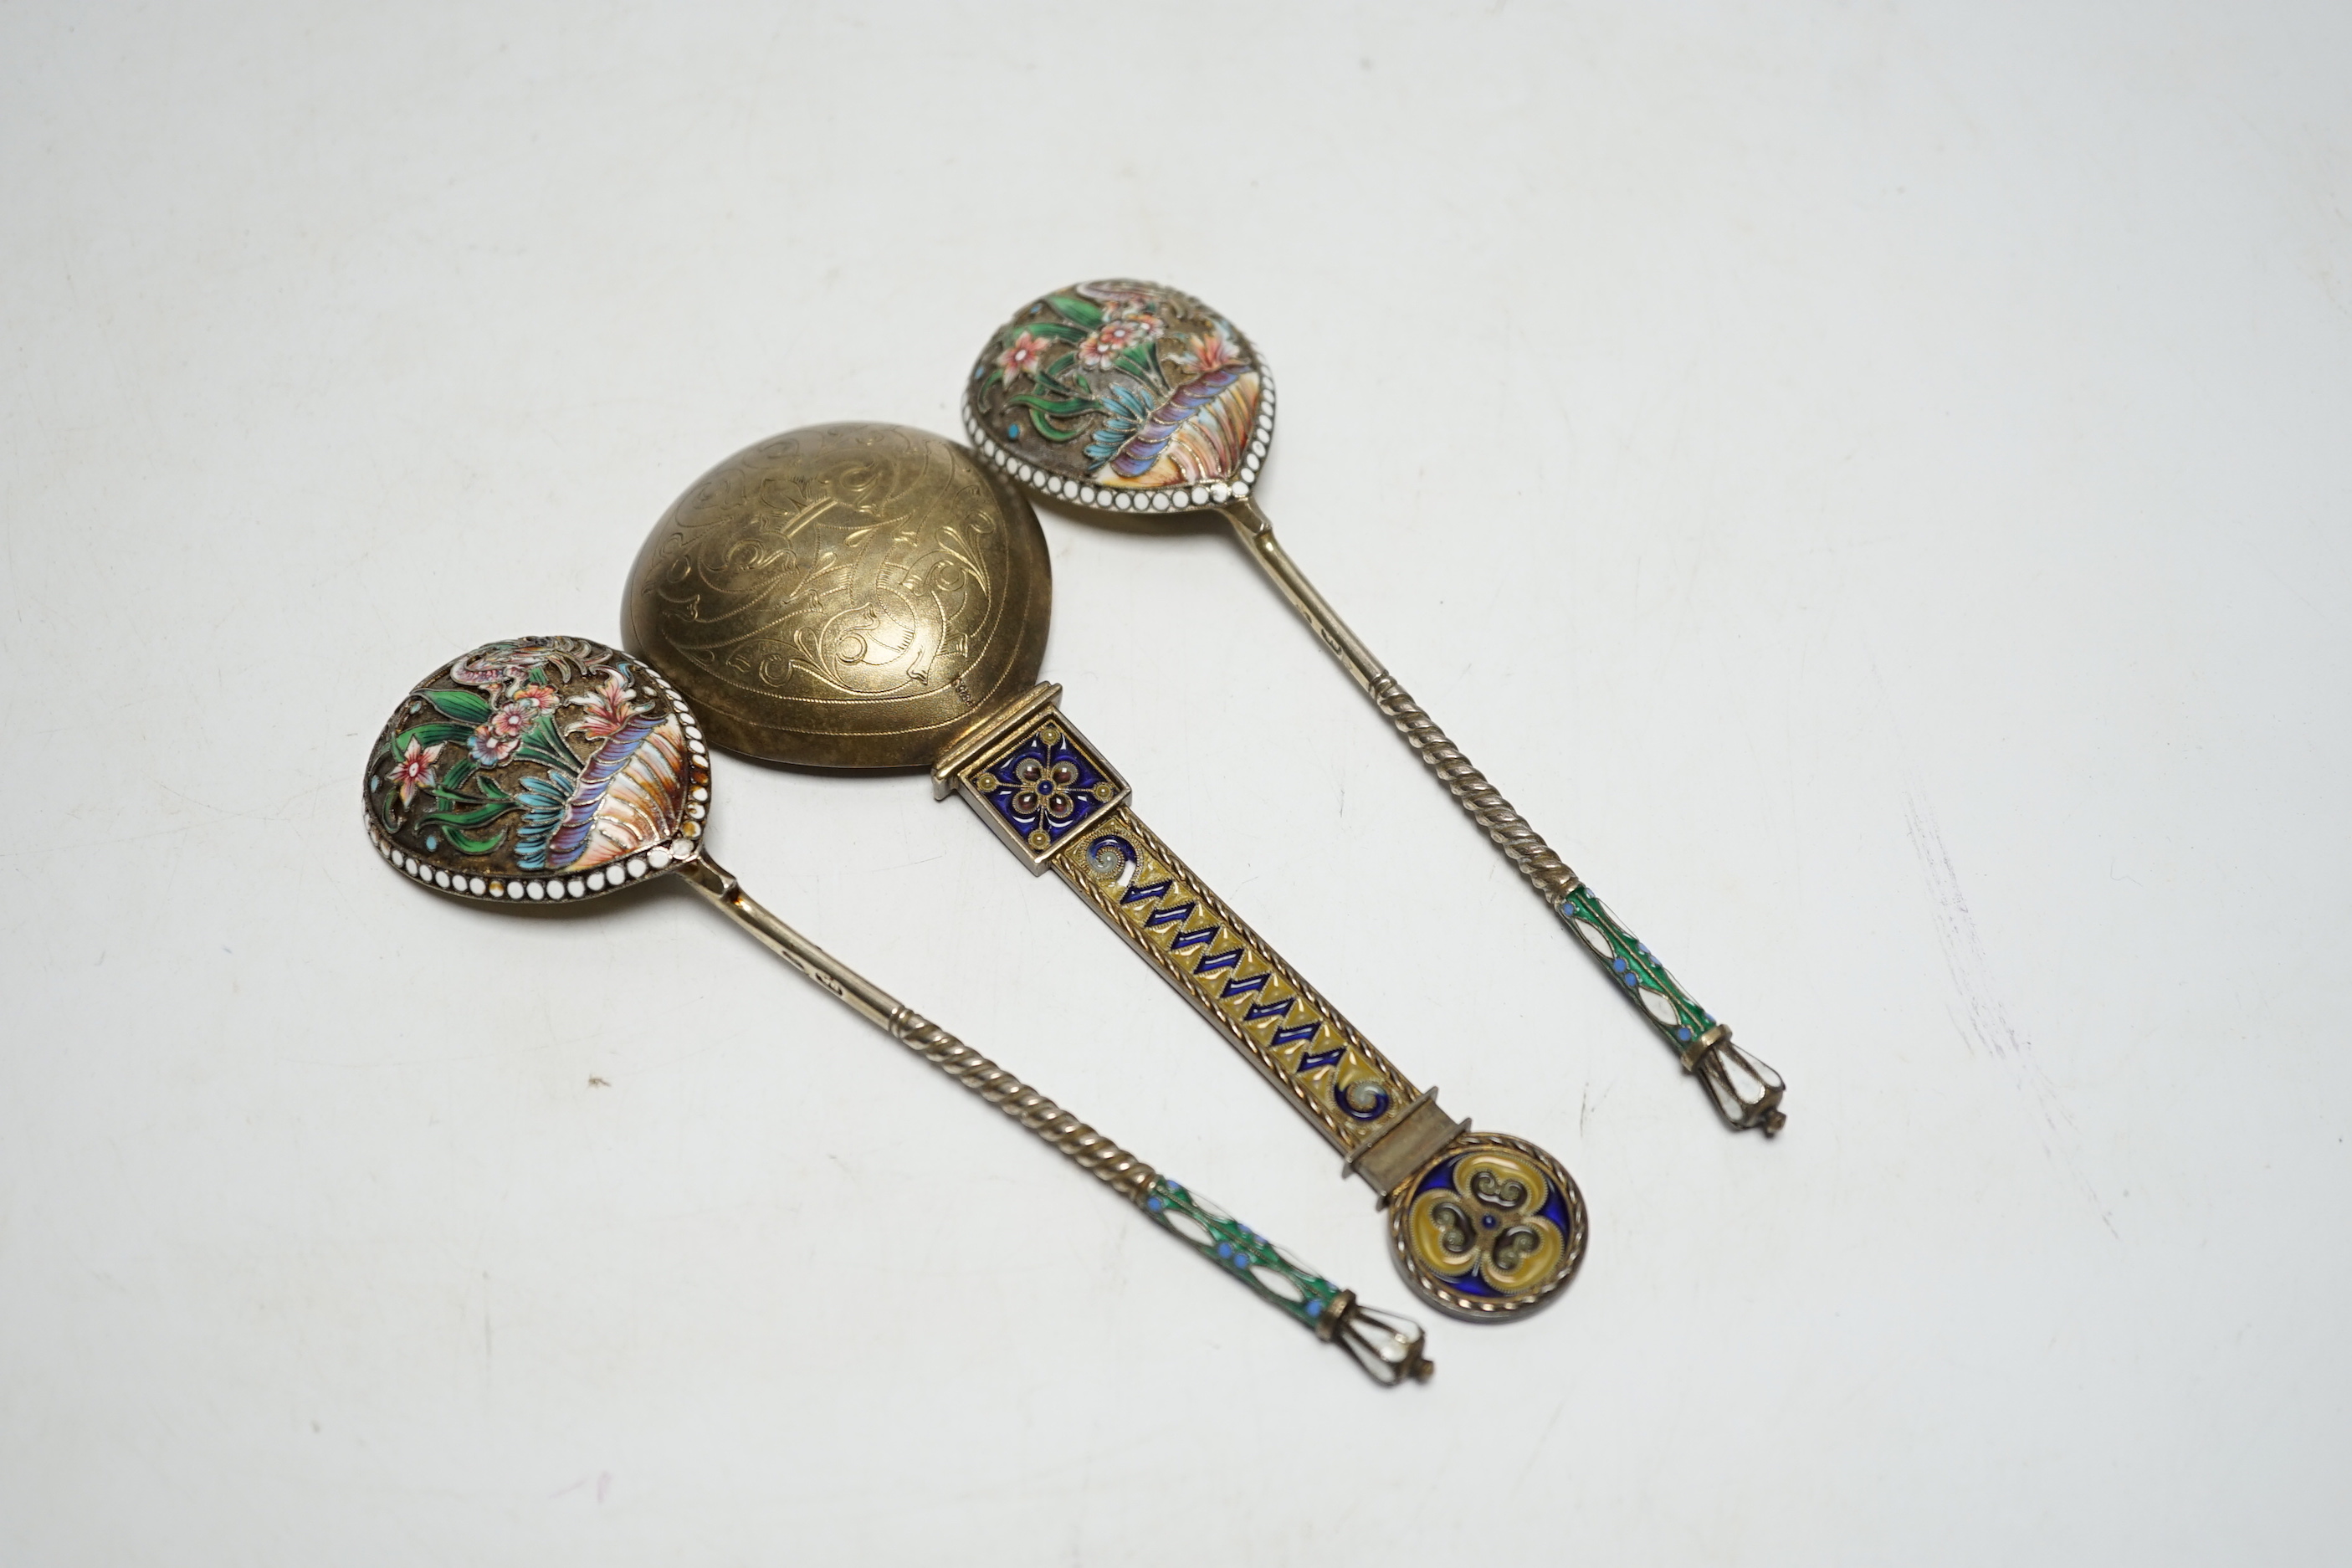 A Norwegian gilt sterling and plique a jour enamelled spoon, 16.2cm (a.f.), together with a pair of late 19th/early 20th century Russian 84 gilt zolotnik and cloisonné enamel spoons.